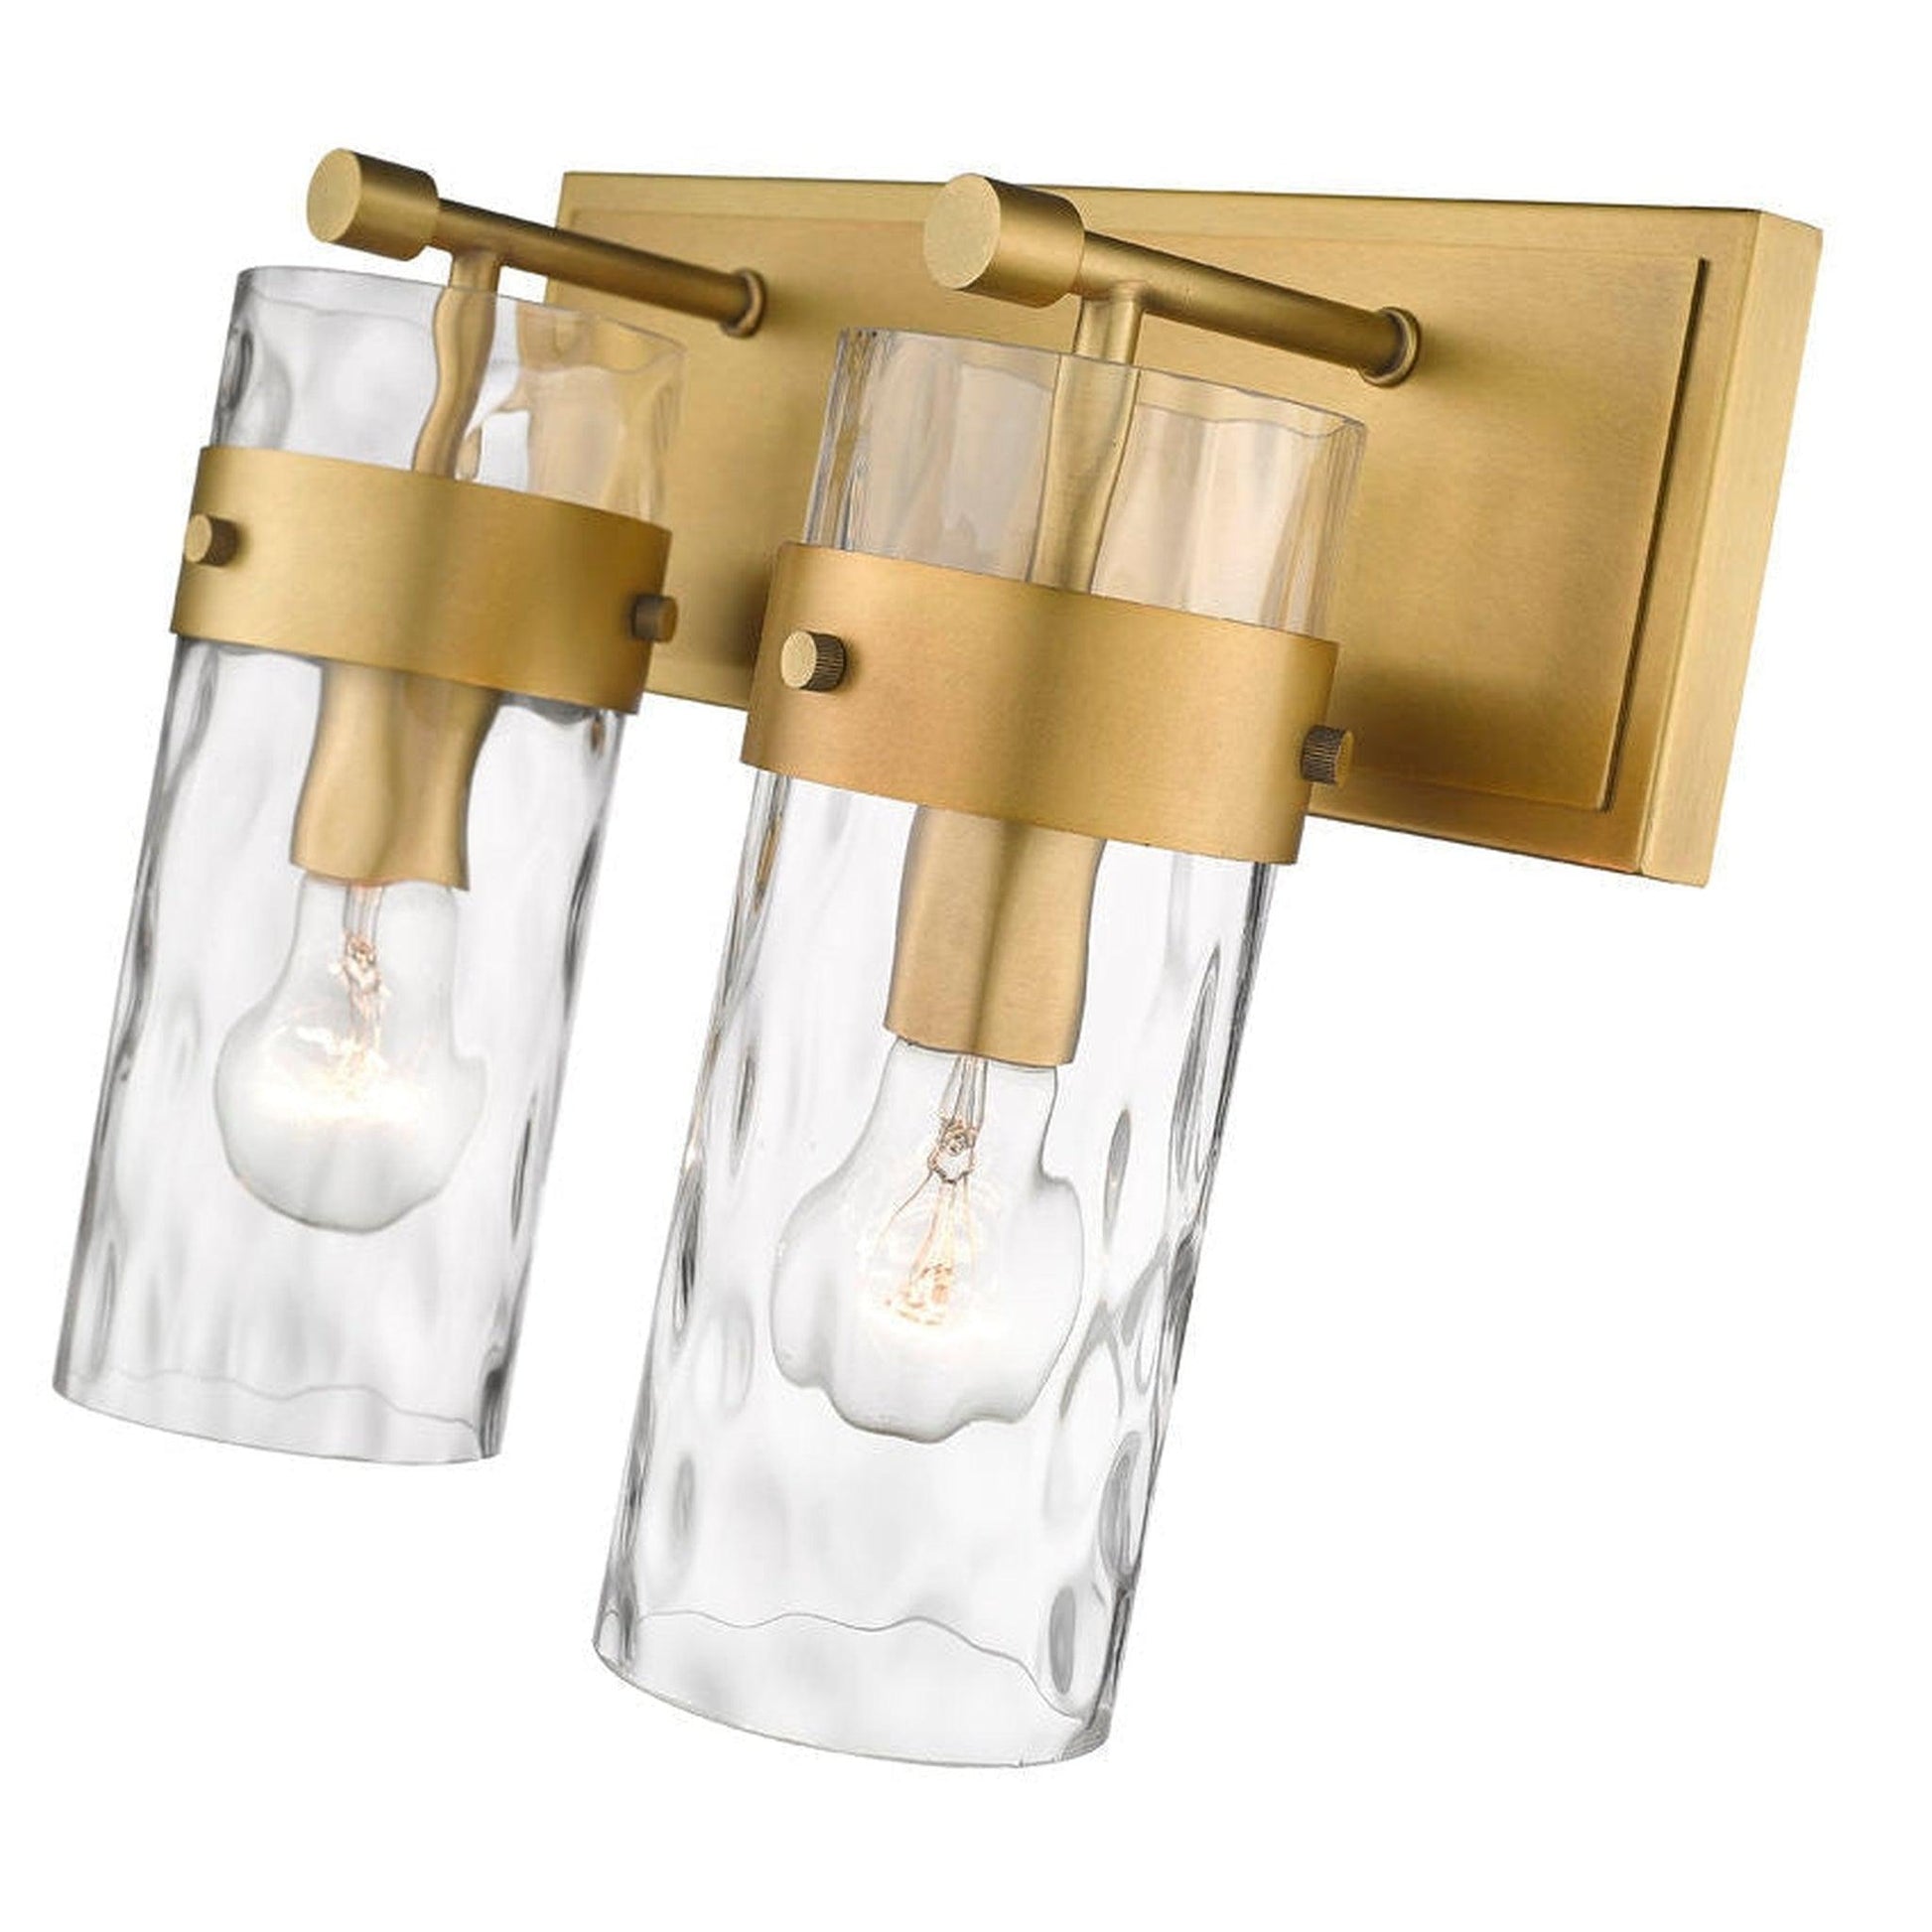 Z-Lite Fontaine 14" 2-Light Rubbed Brass Vanity Light With Clear Glass Shade